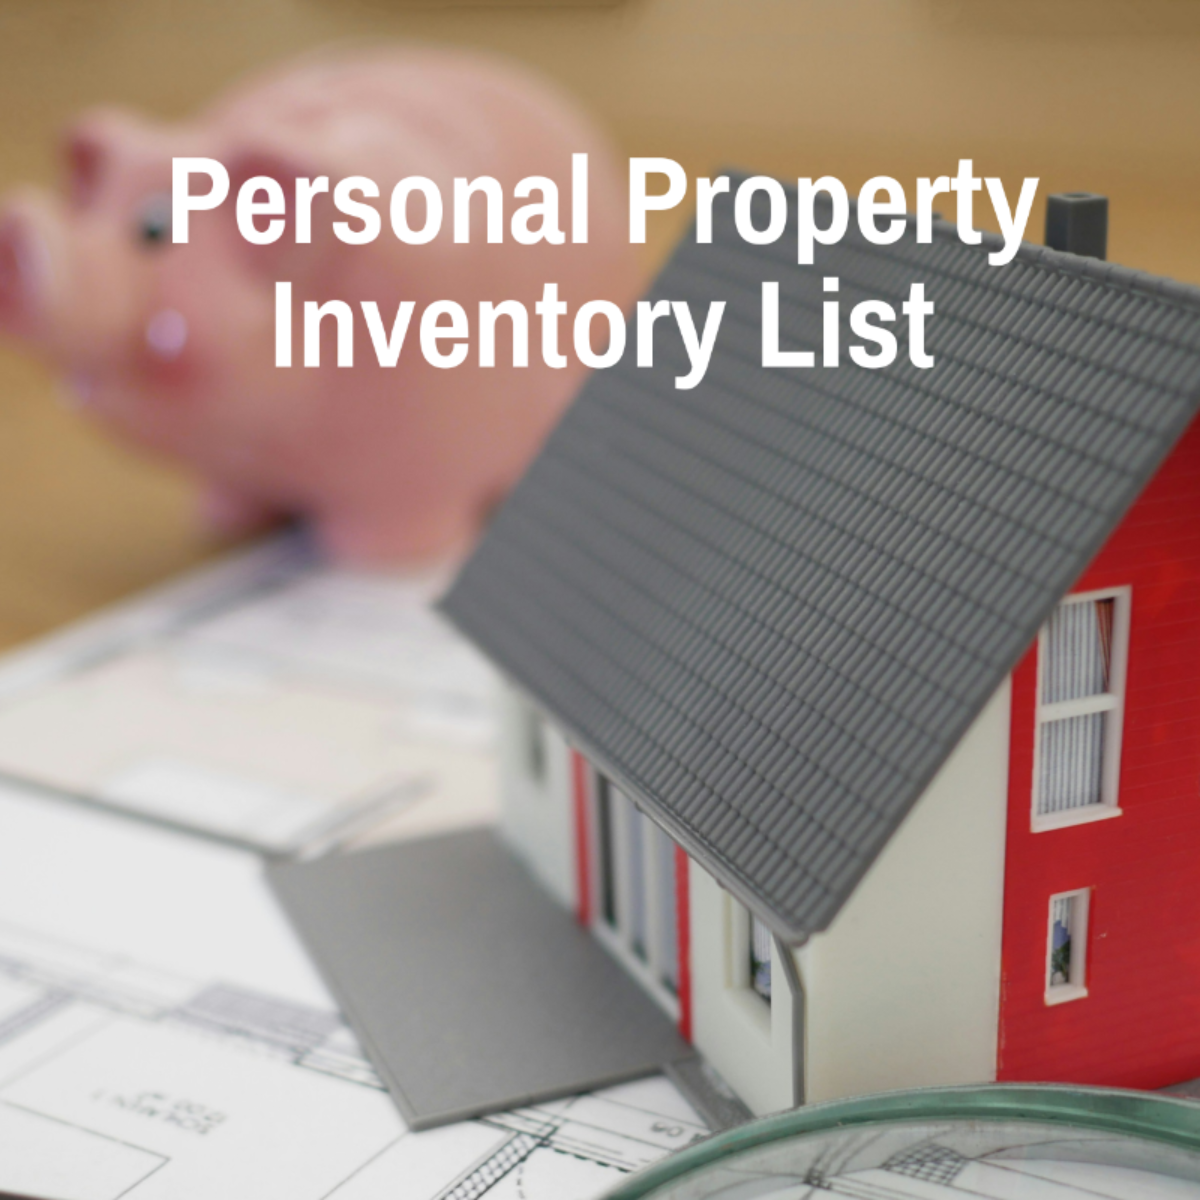 Personal Property Inventory List Template